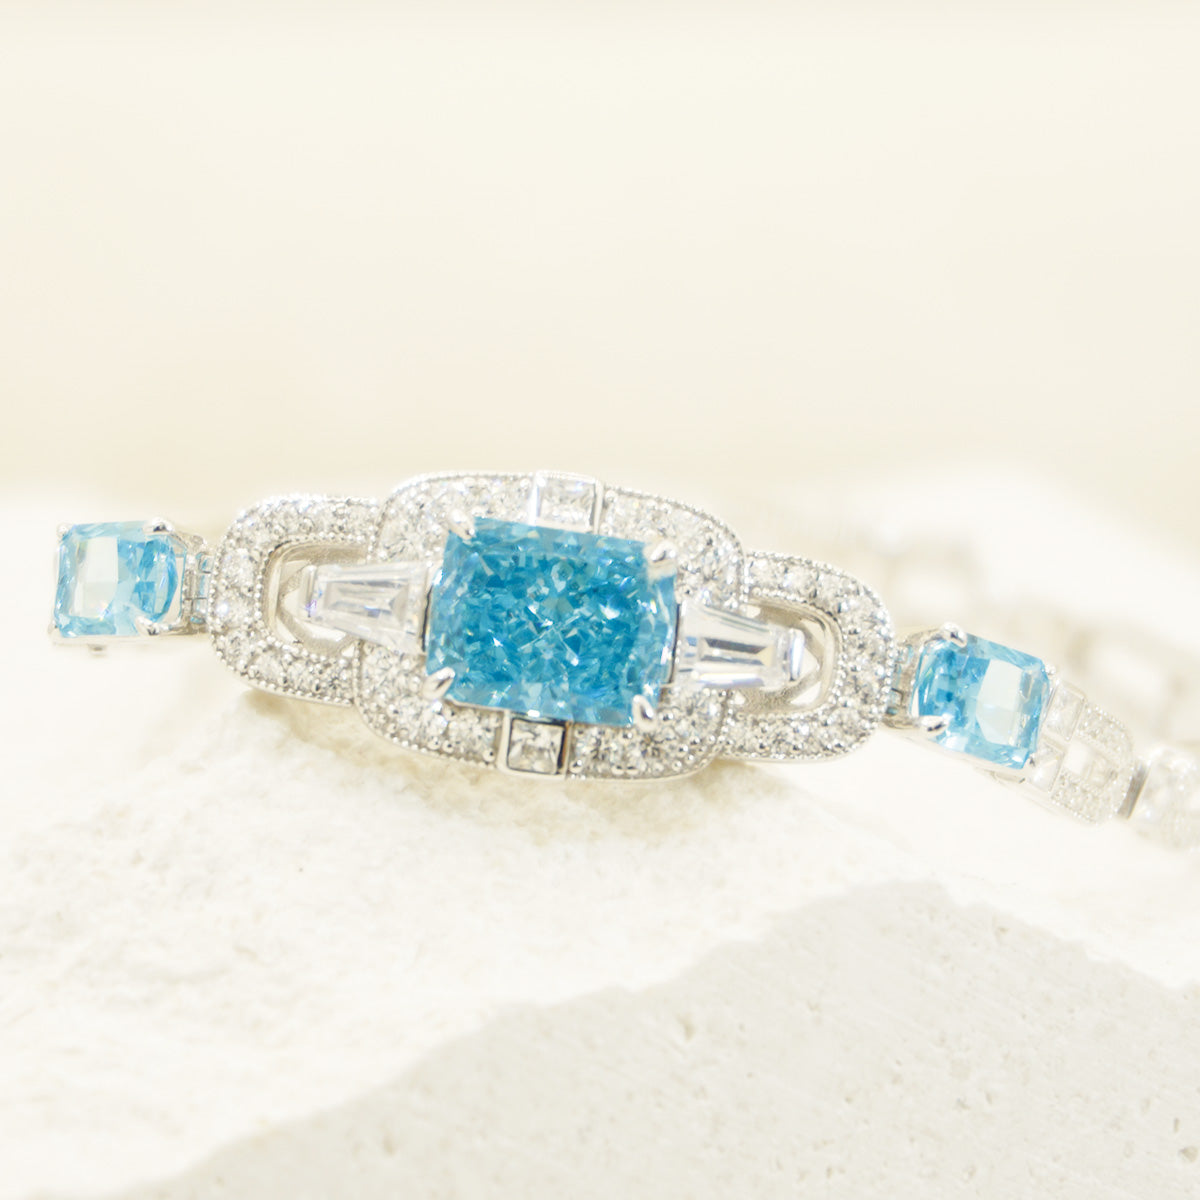 Sterling Silver Square Aquamarine Sapphire with Crushed-ice Setting Elegant Bracelet